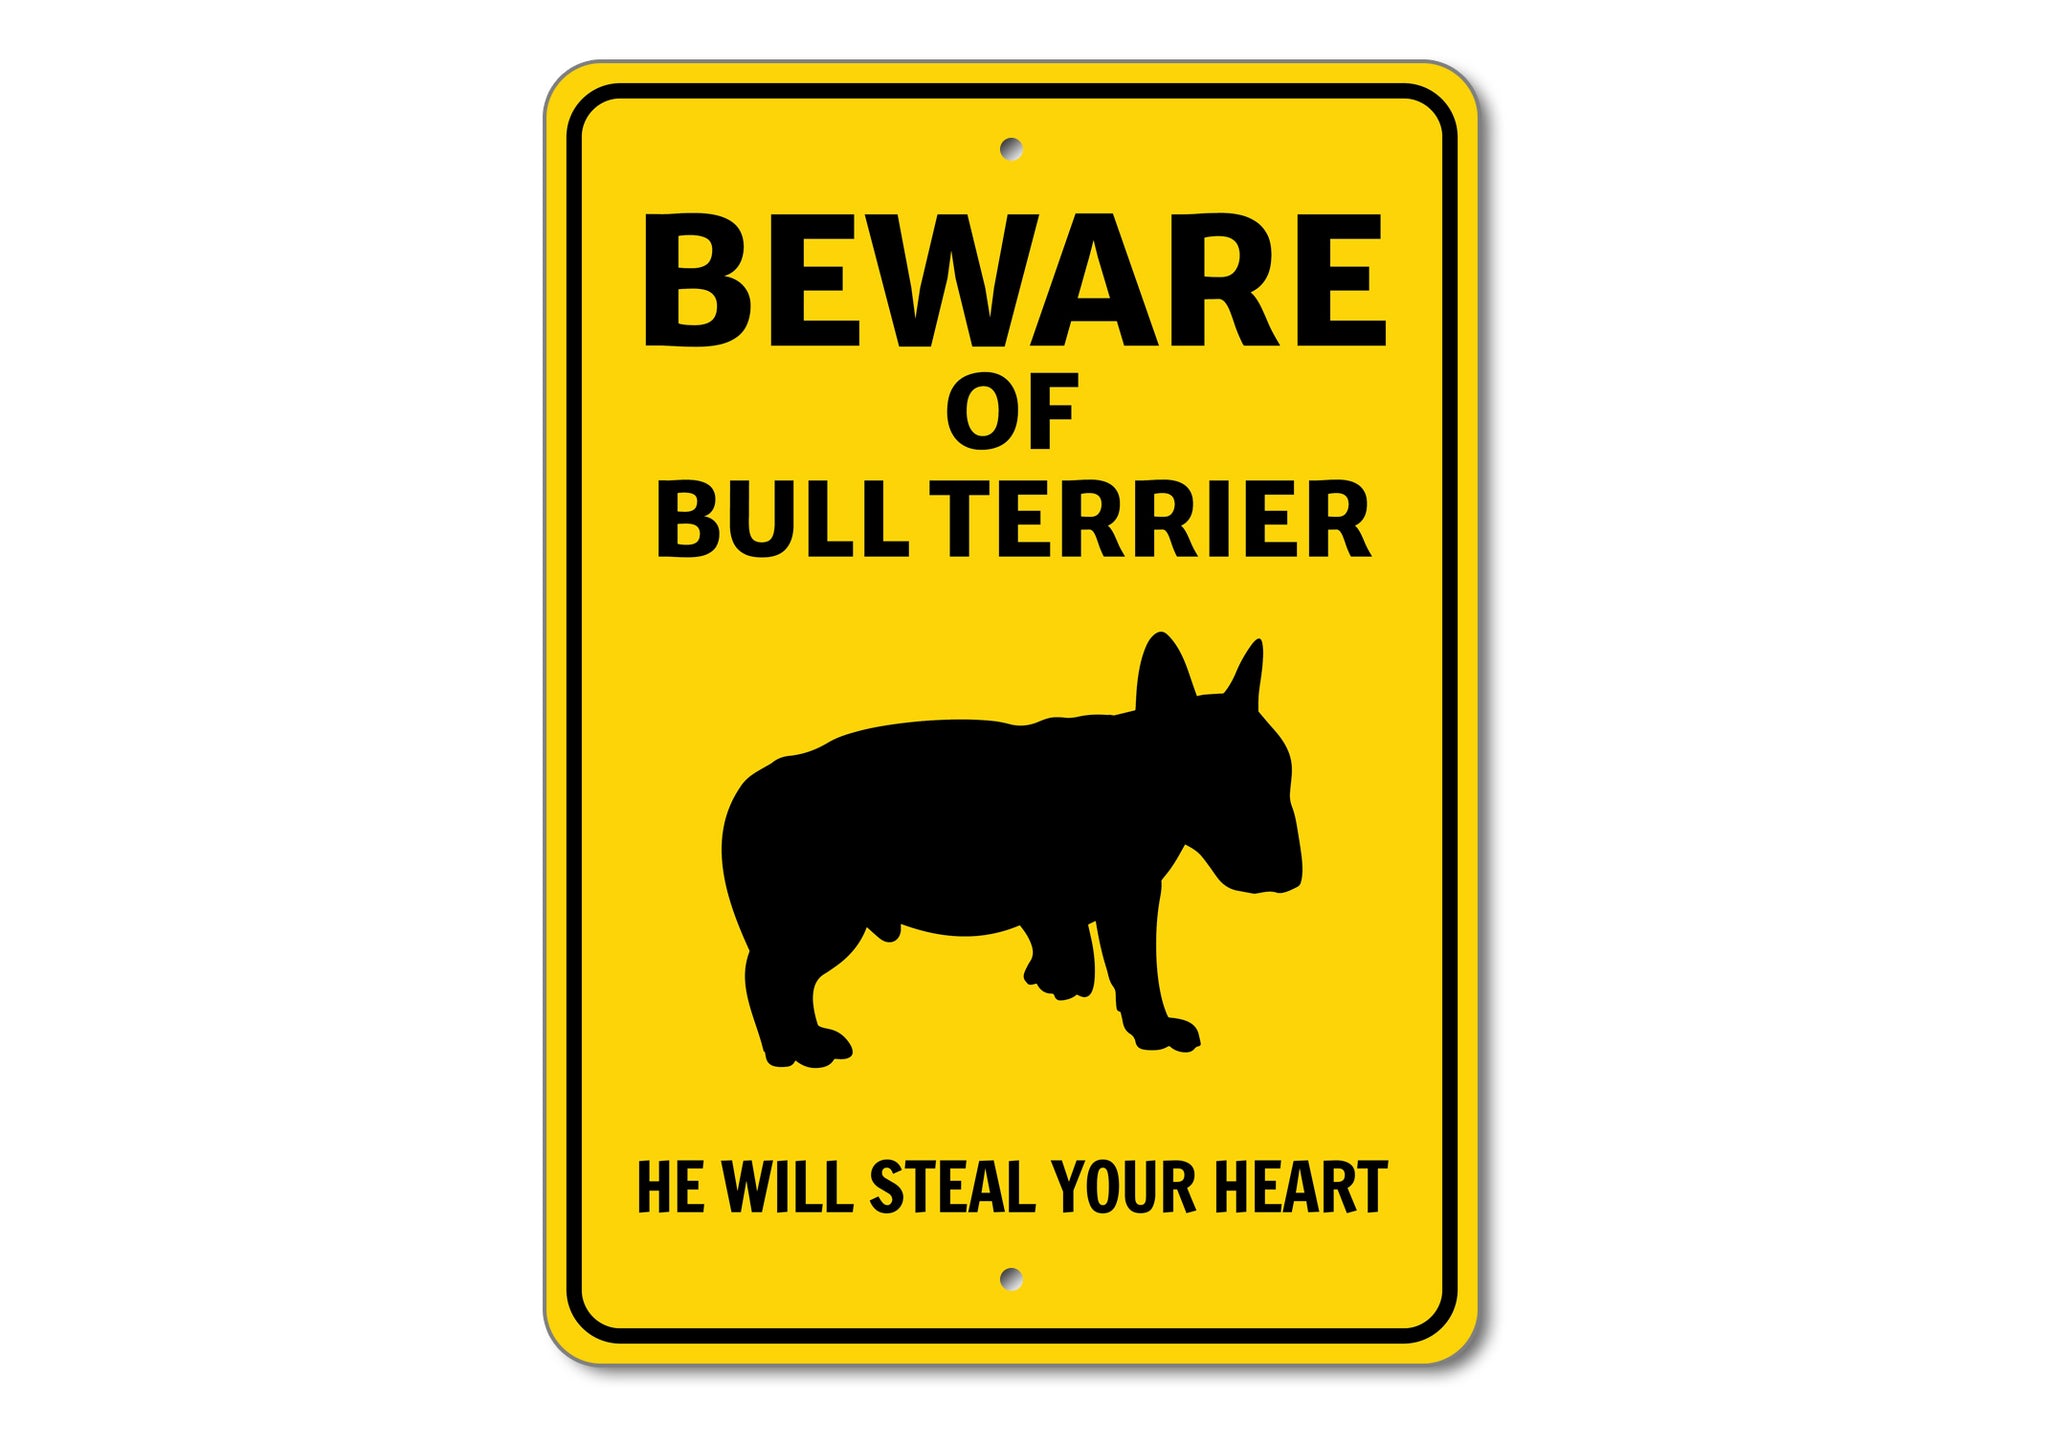 Beware He Will Steal Your Heart K9 Sign - Dog Names Starting with "B part 2"